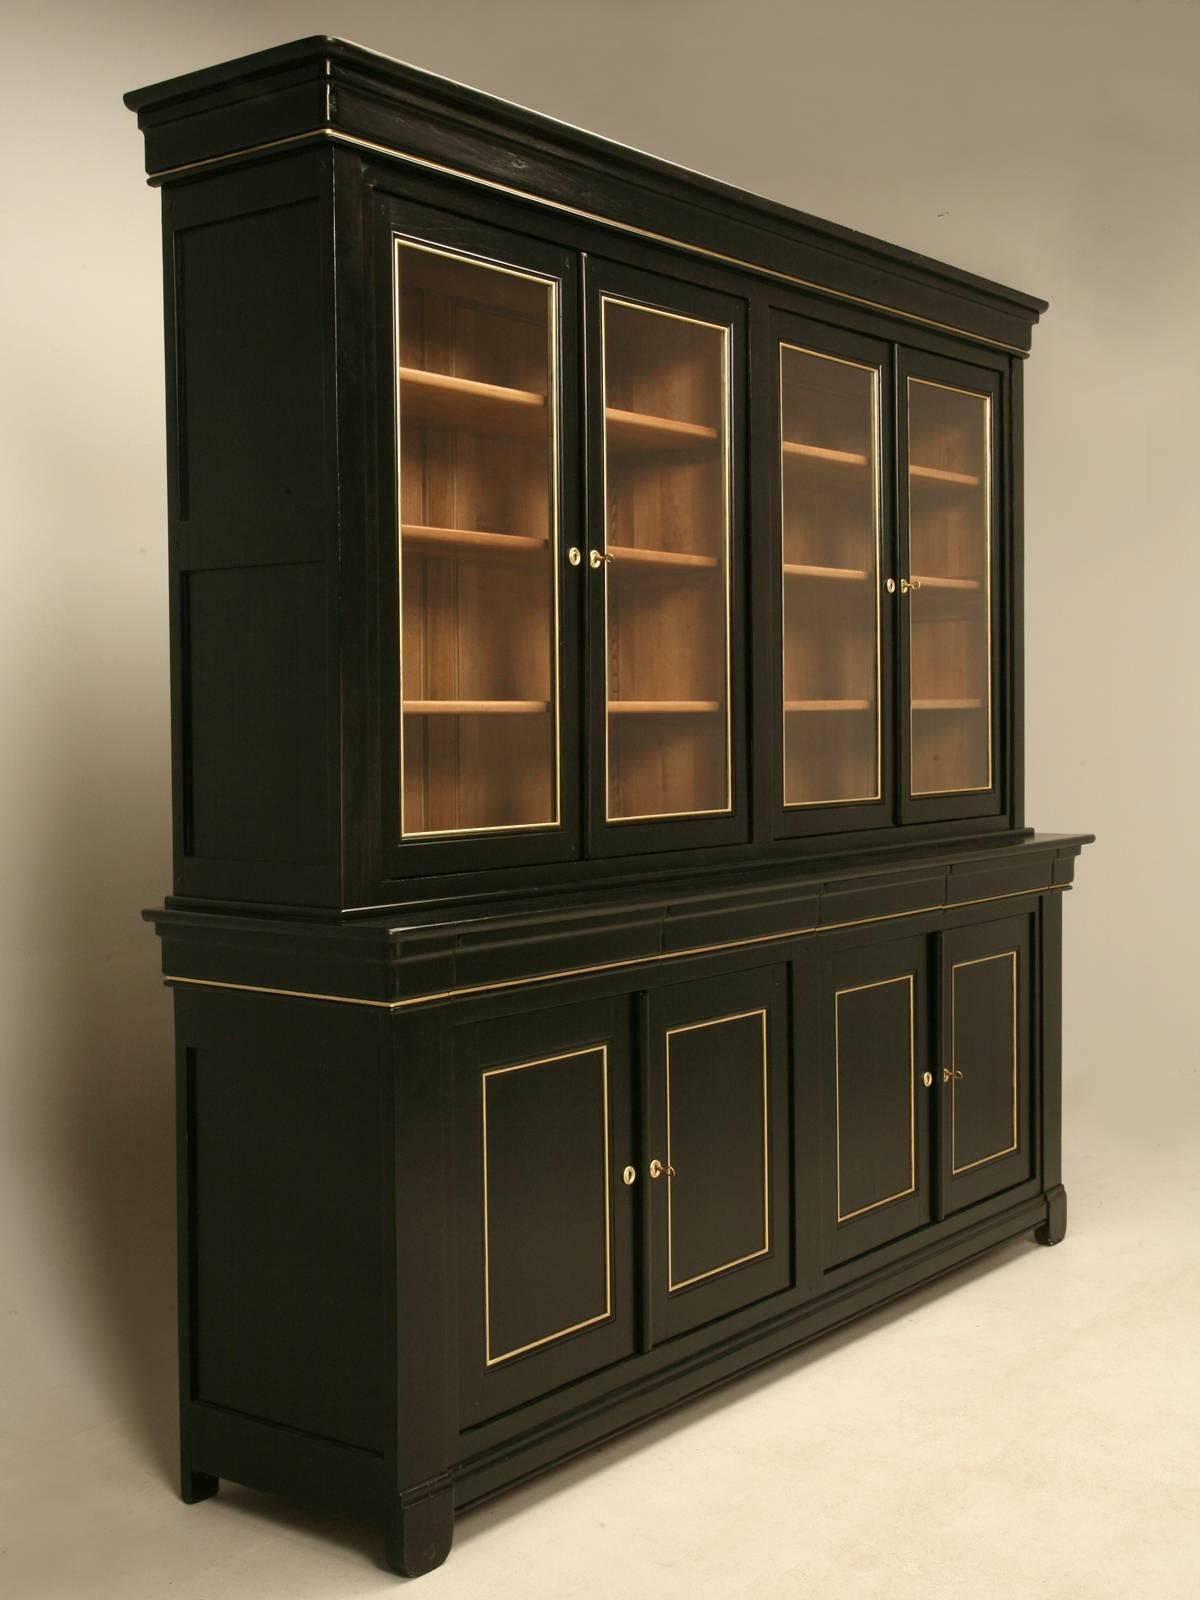 French Louis Philippe style grand bookcase in an ebonized finish with gold detailing. Our workshop went through the cabinet from top to bottom and spent over 80 hours making sure everything is functioning as it should. The interior was left in a